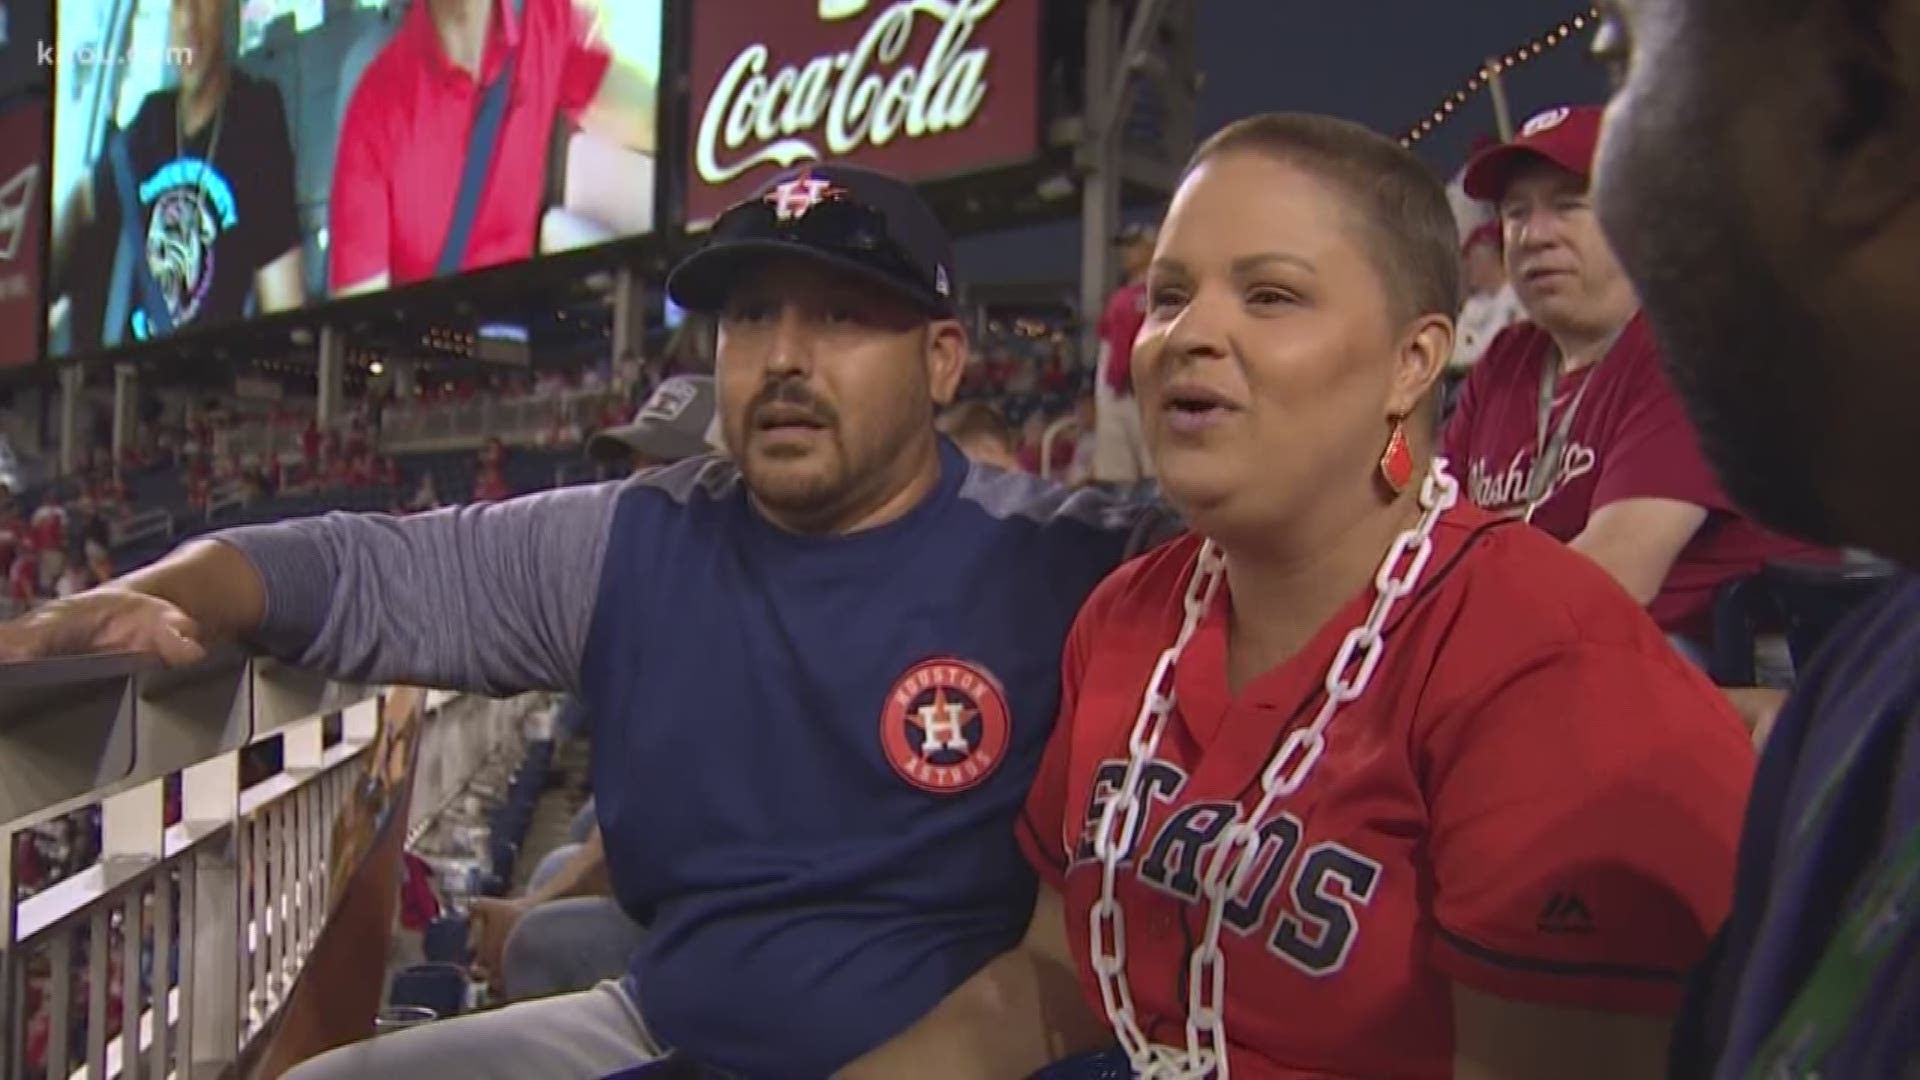 Weeks before Kayla Collazo is scheduled to have double mastectomy surgery, she and her husband to get tickets to the three World Series games in Washington, D.C.